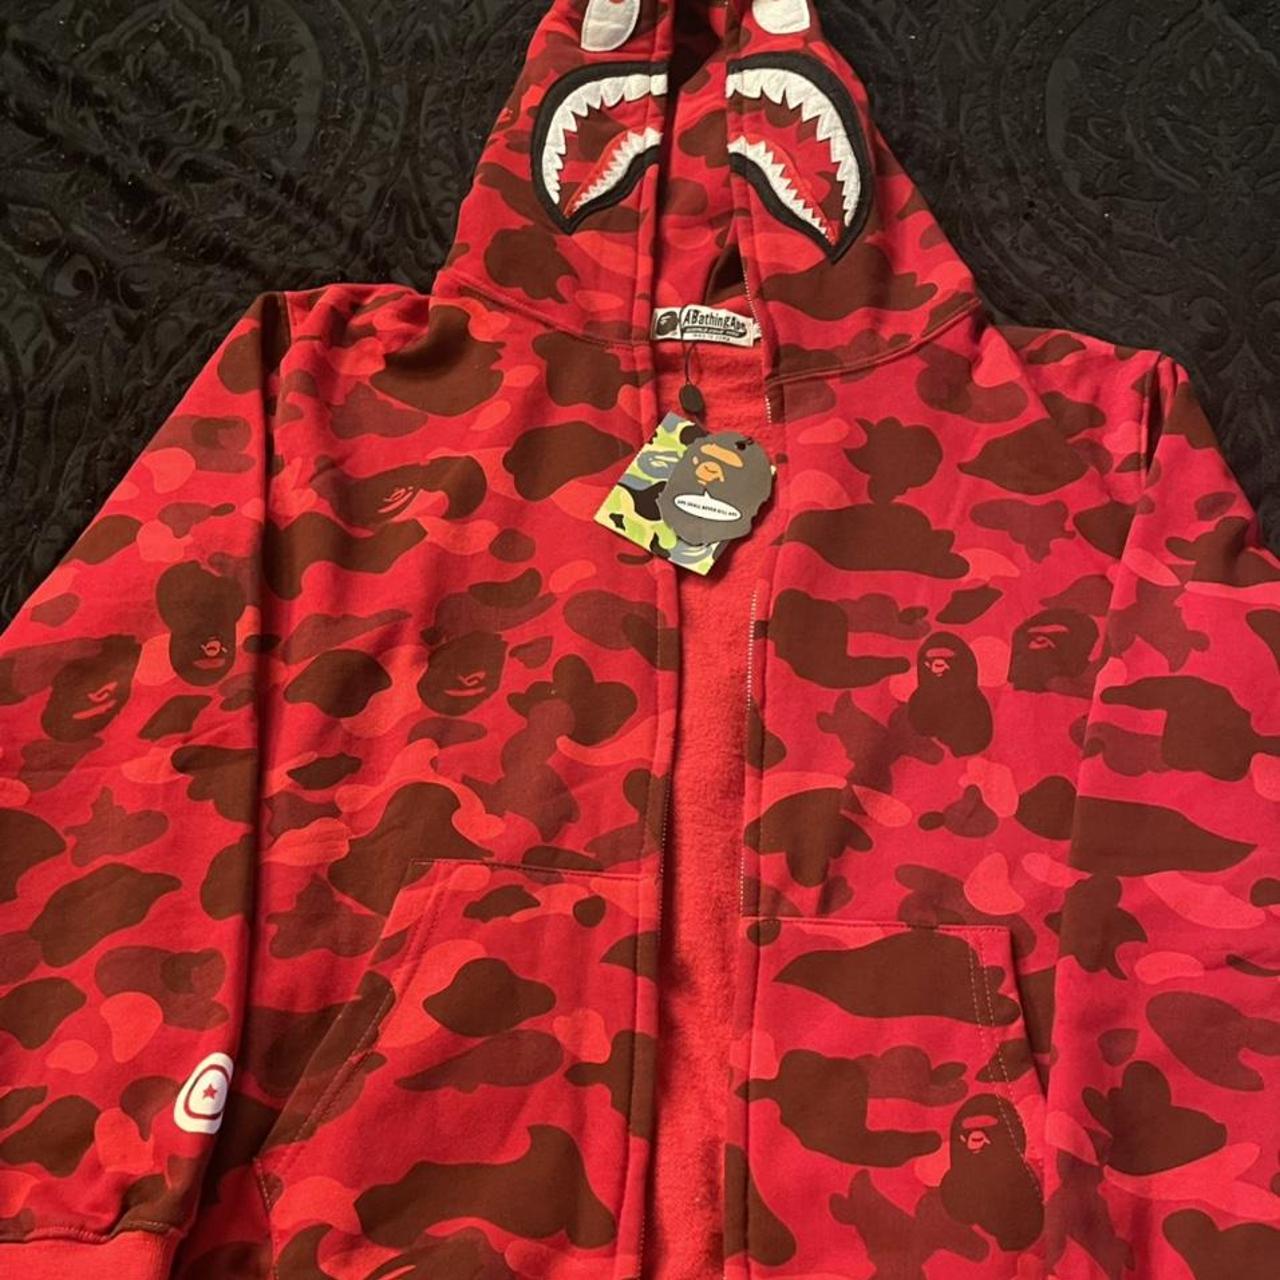 CITY CAMO SHARK HOODIE DOWN JACKET available at BAPE STORE